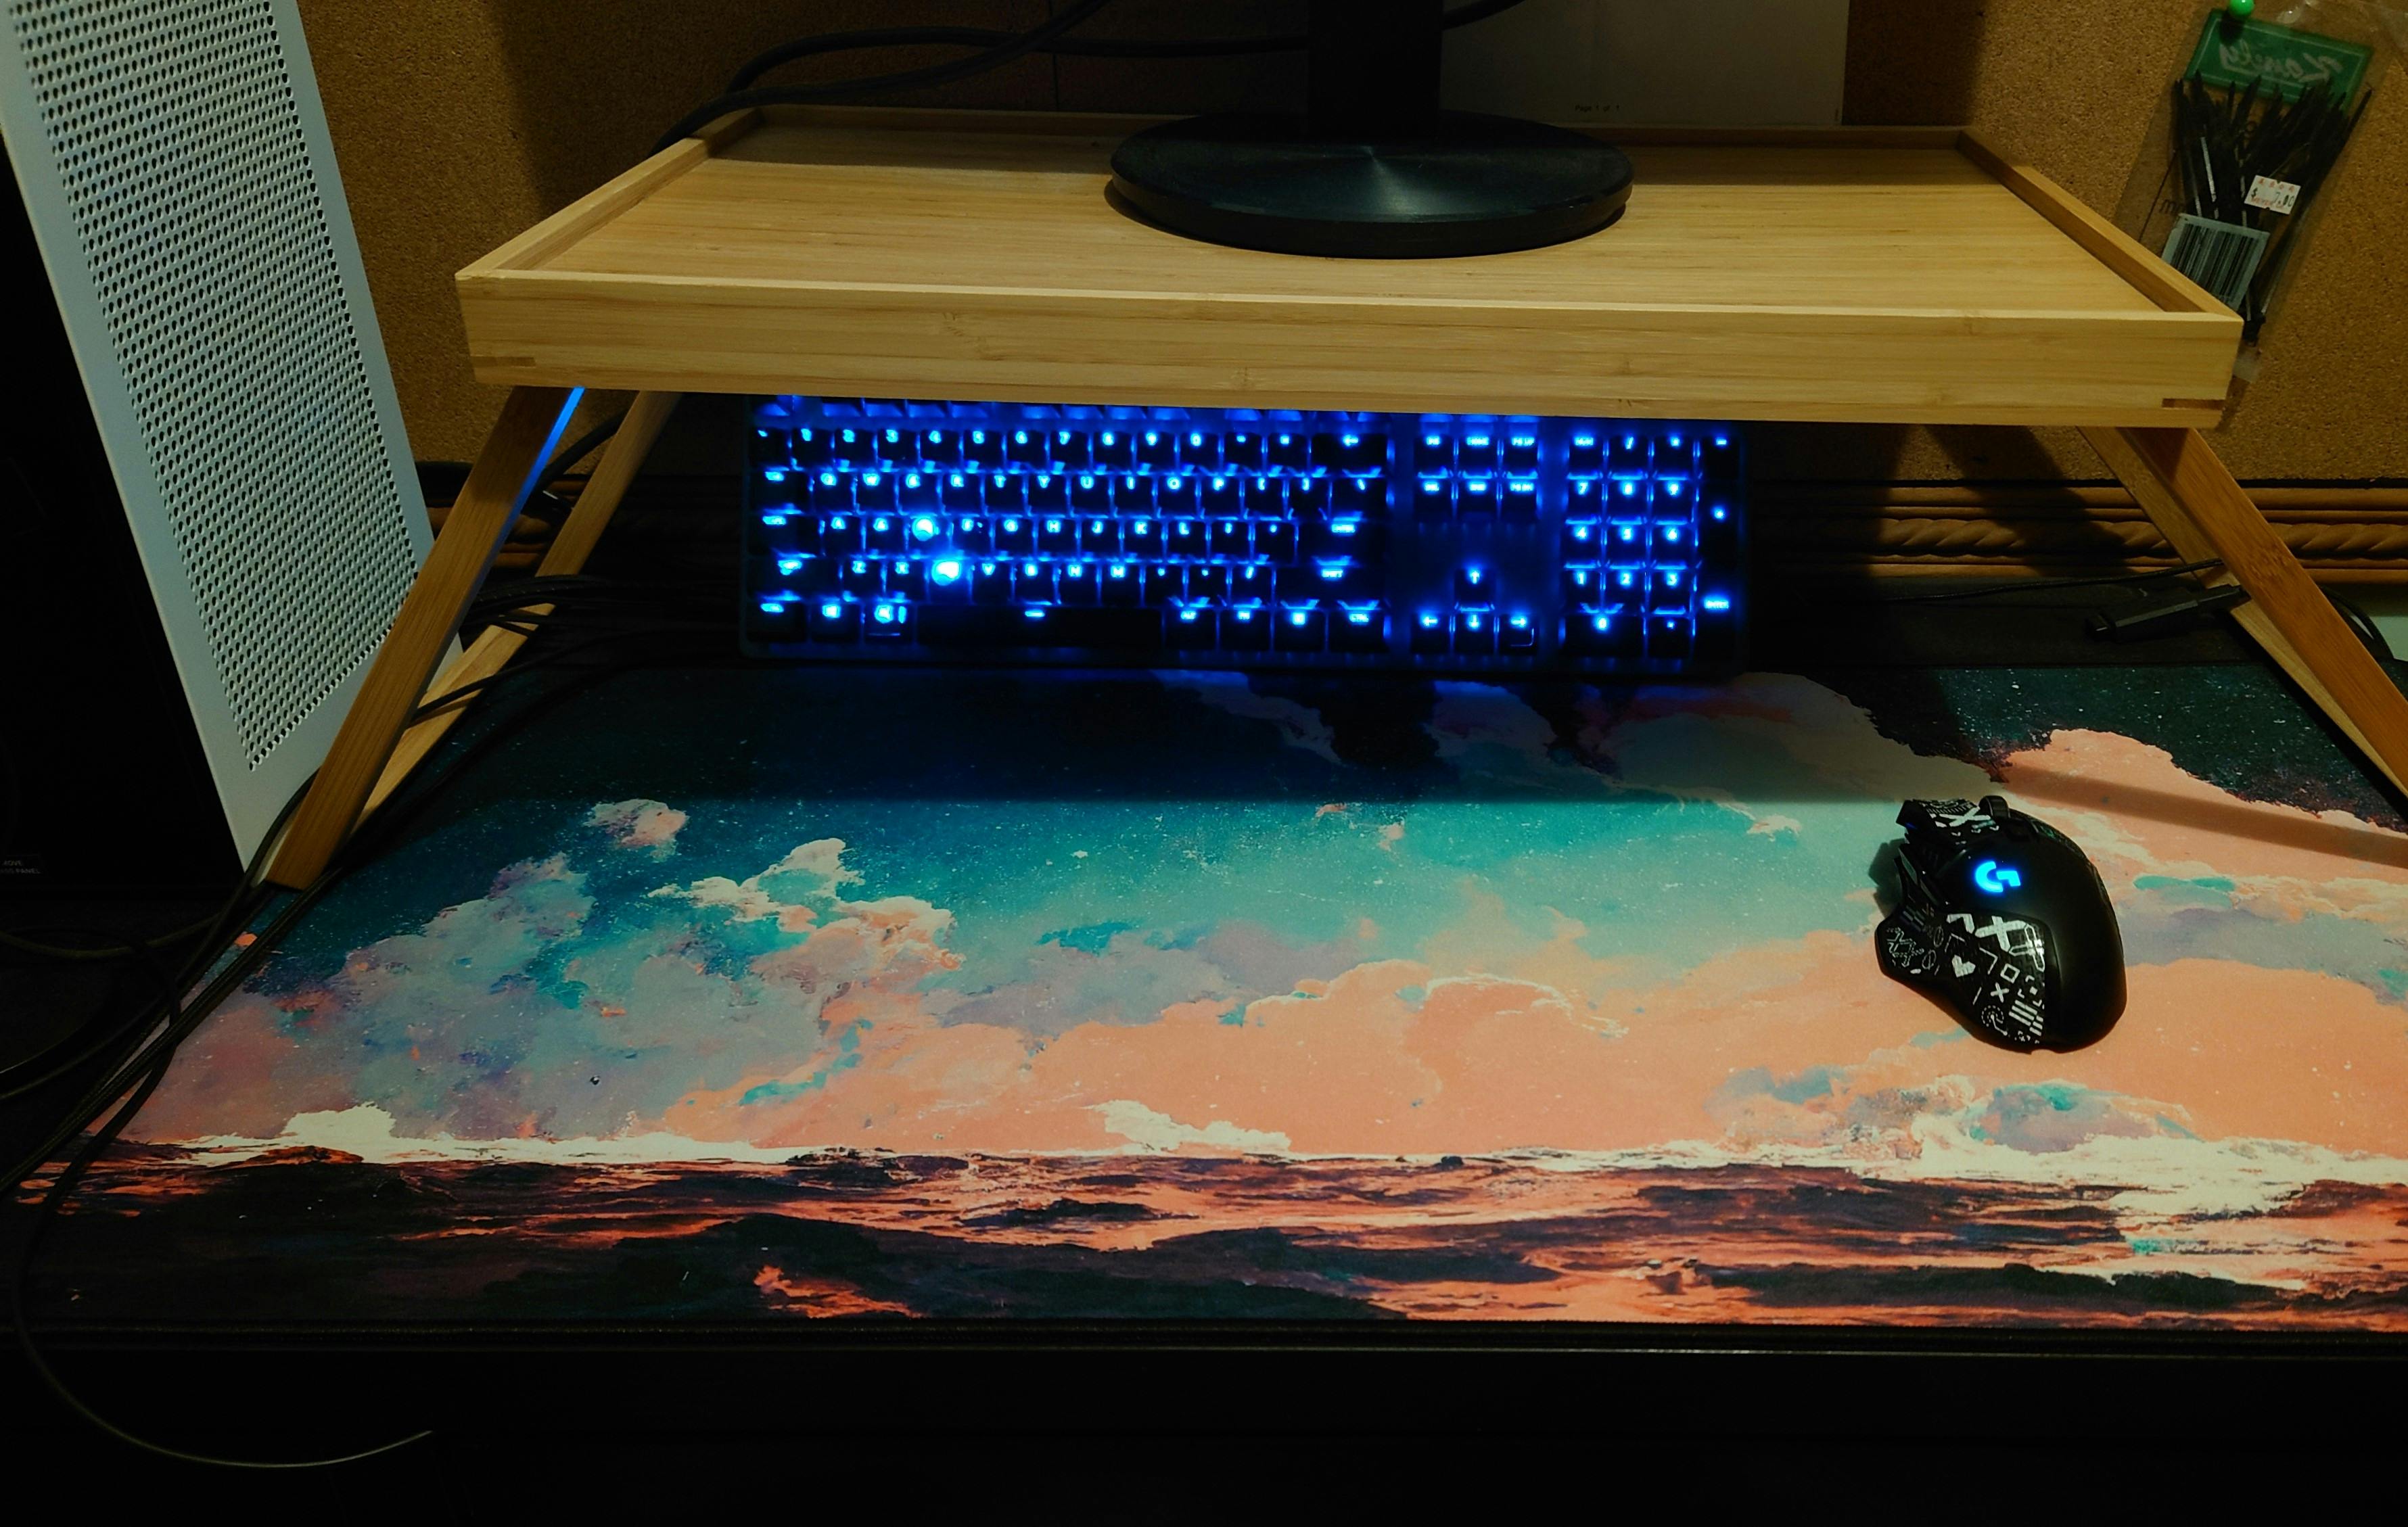 Review photo of deskmat by Beer